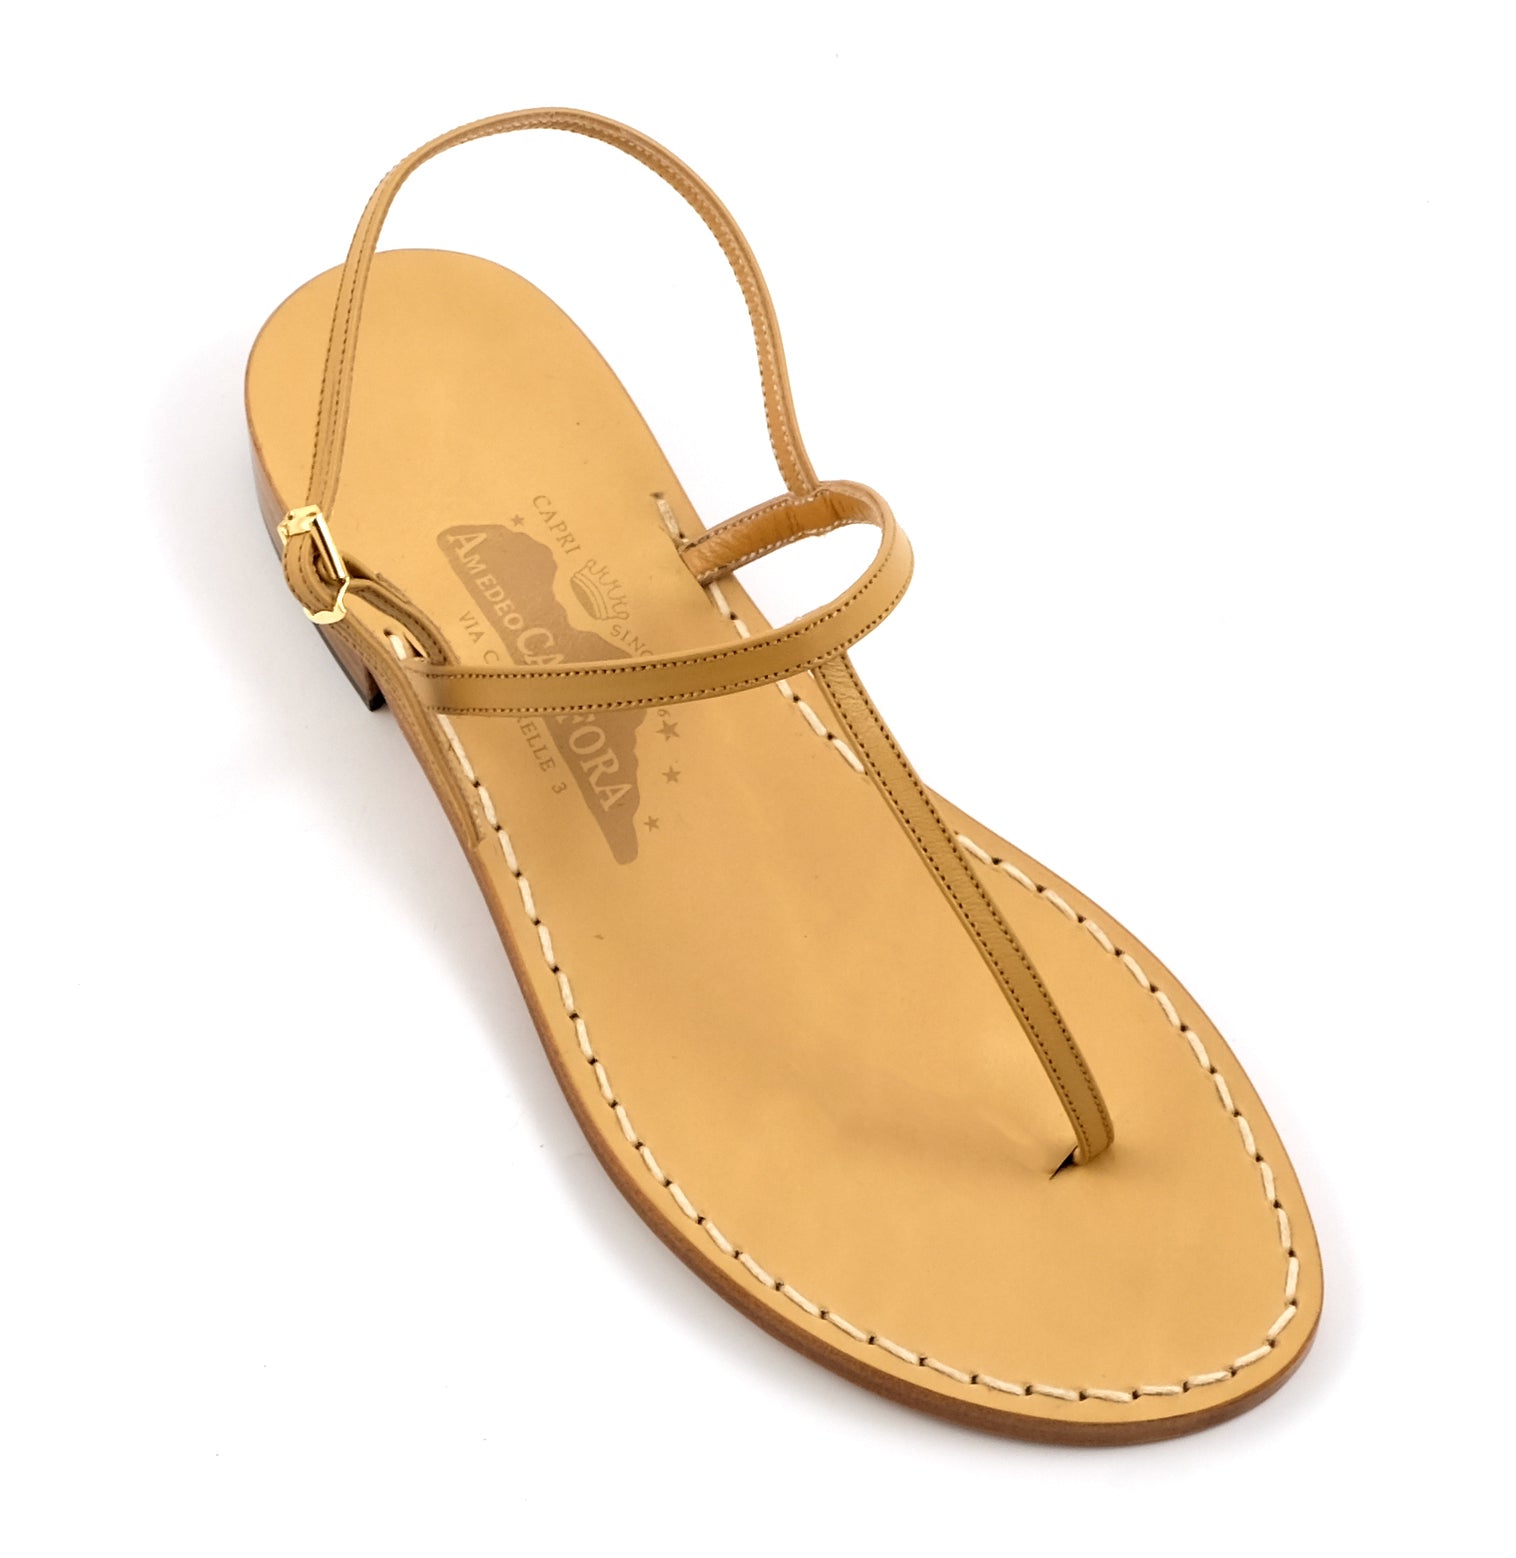 CANFORA GAIL Leather Sandals